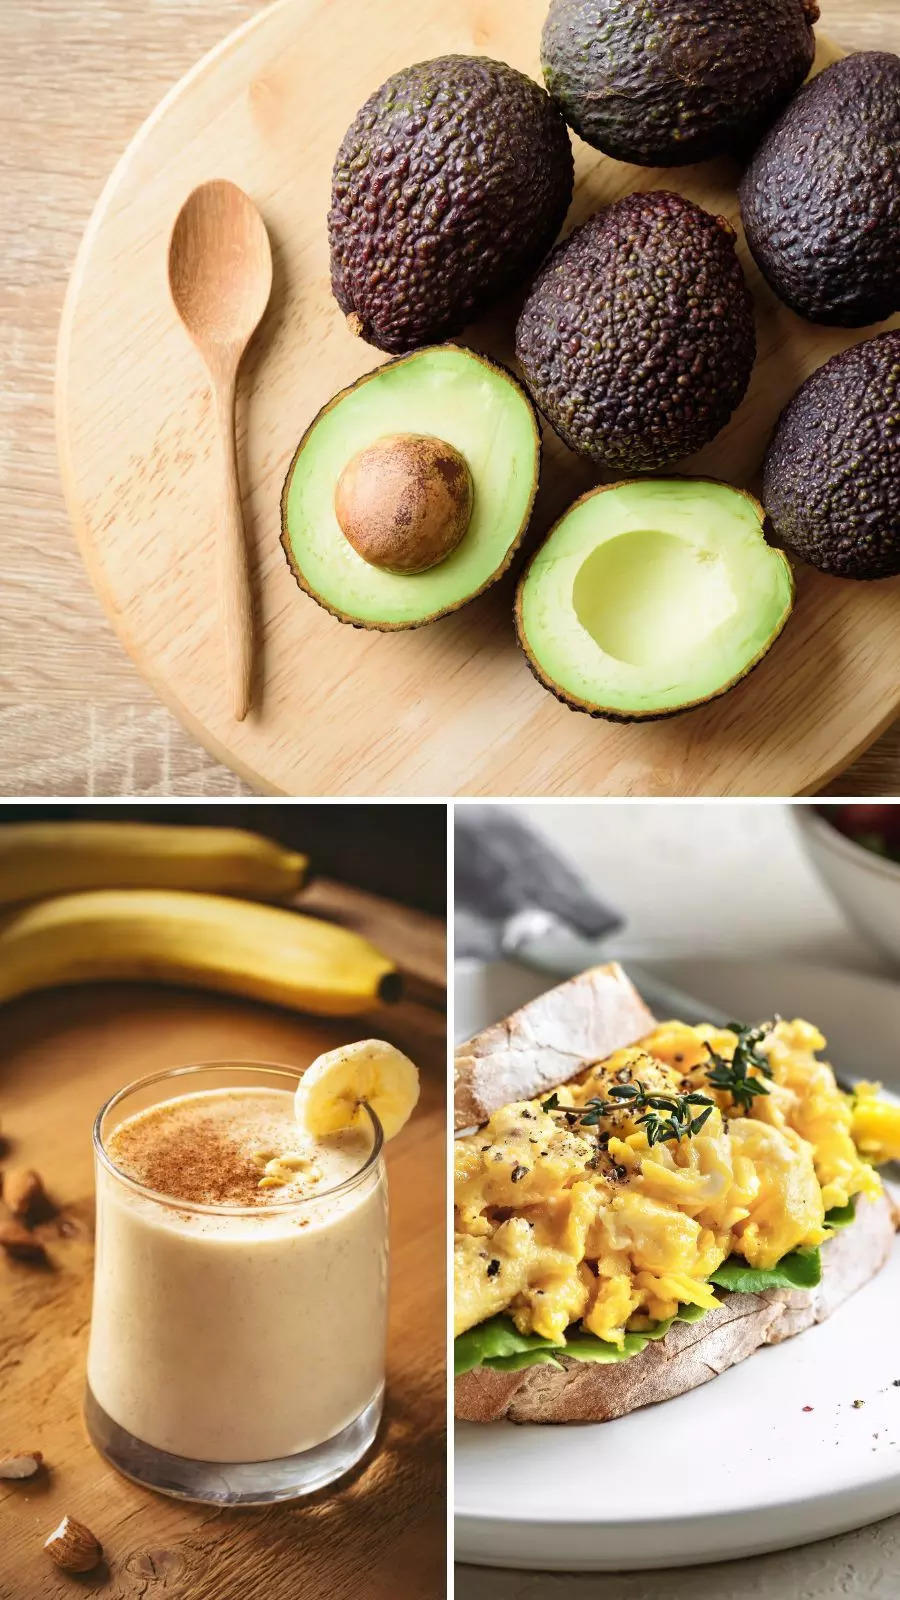 Desi avocado alternatives that are healthy won't cost you a bomb